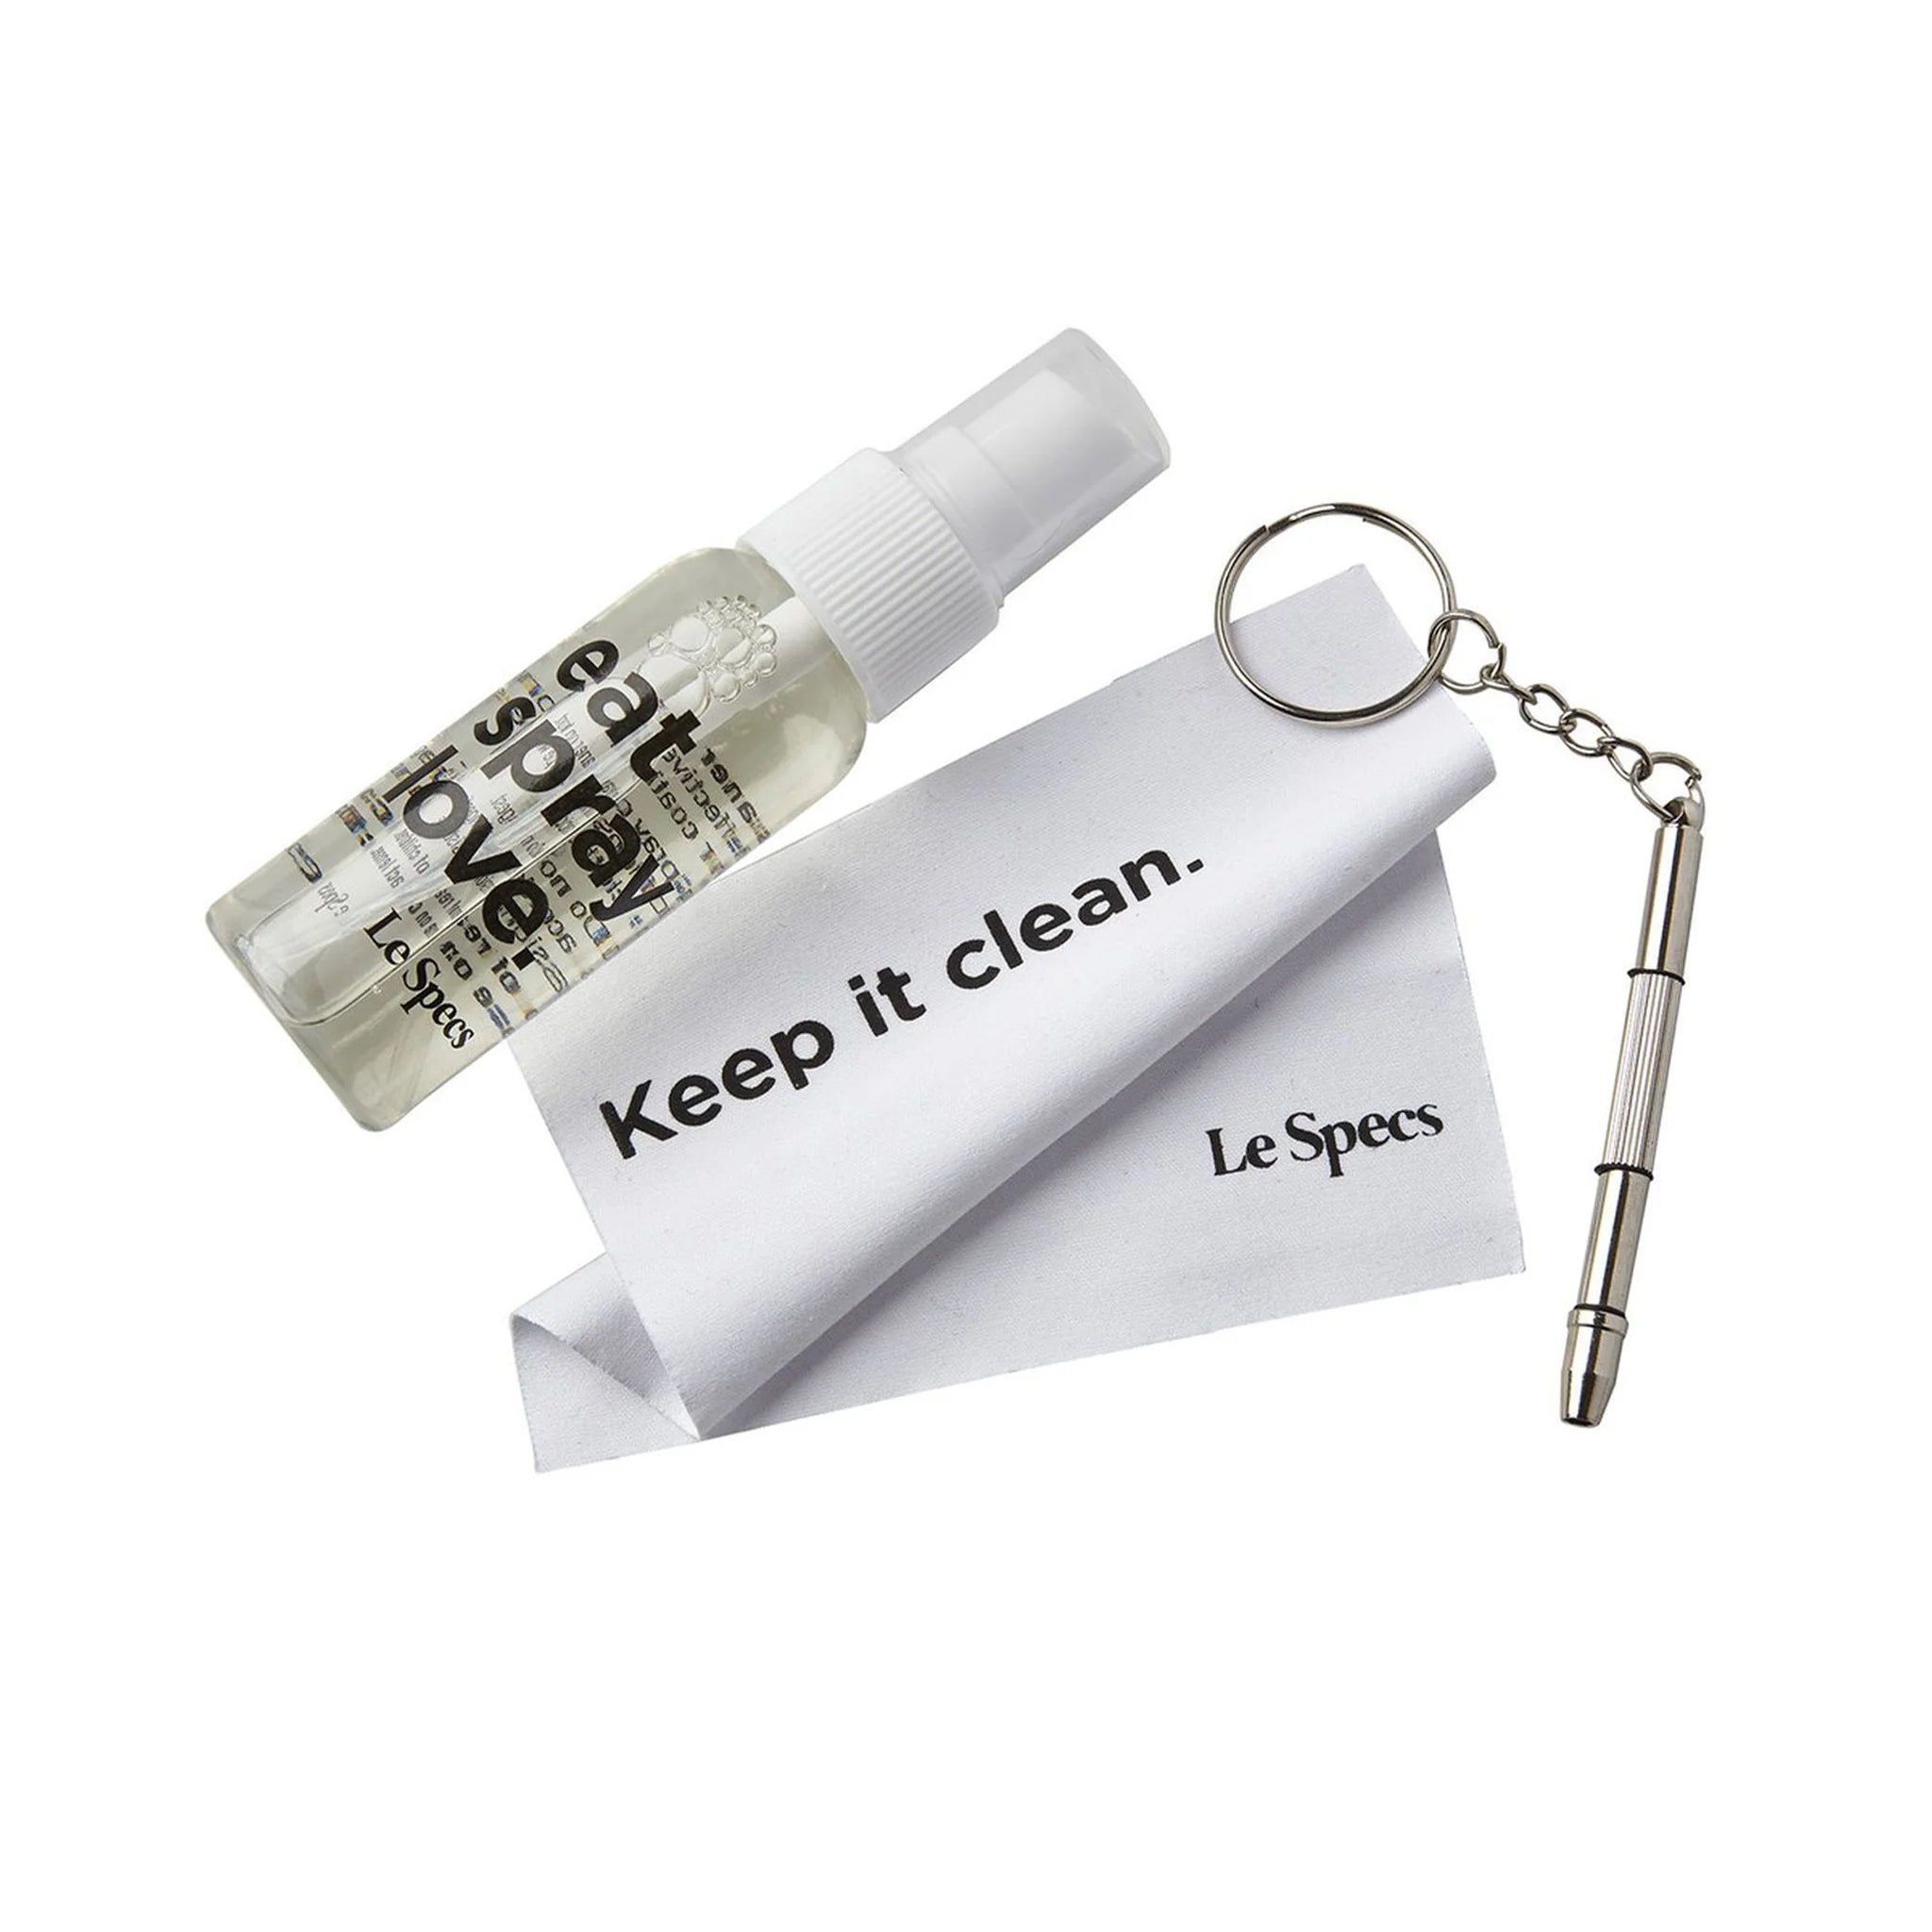 Le Specs Cleaning Kit | Spray, Cloth & Tool